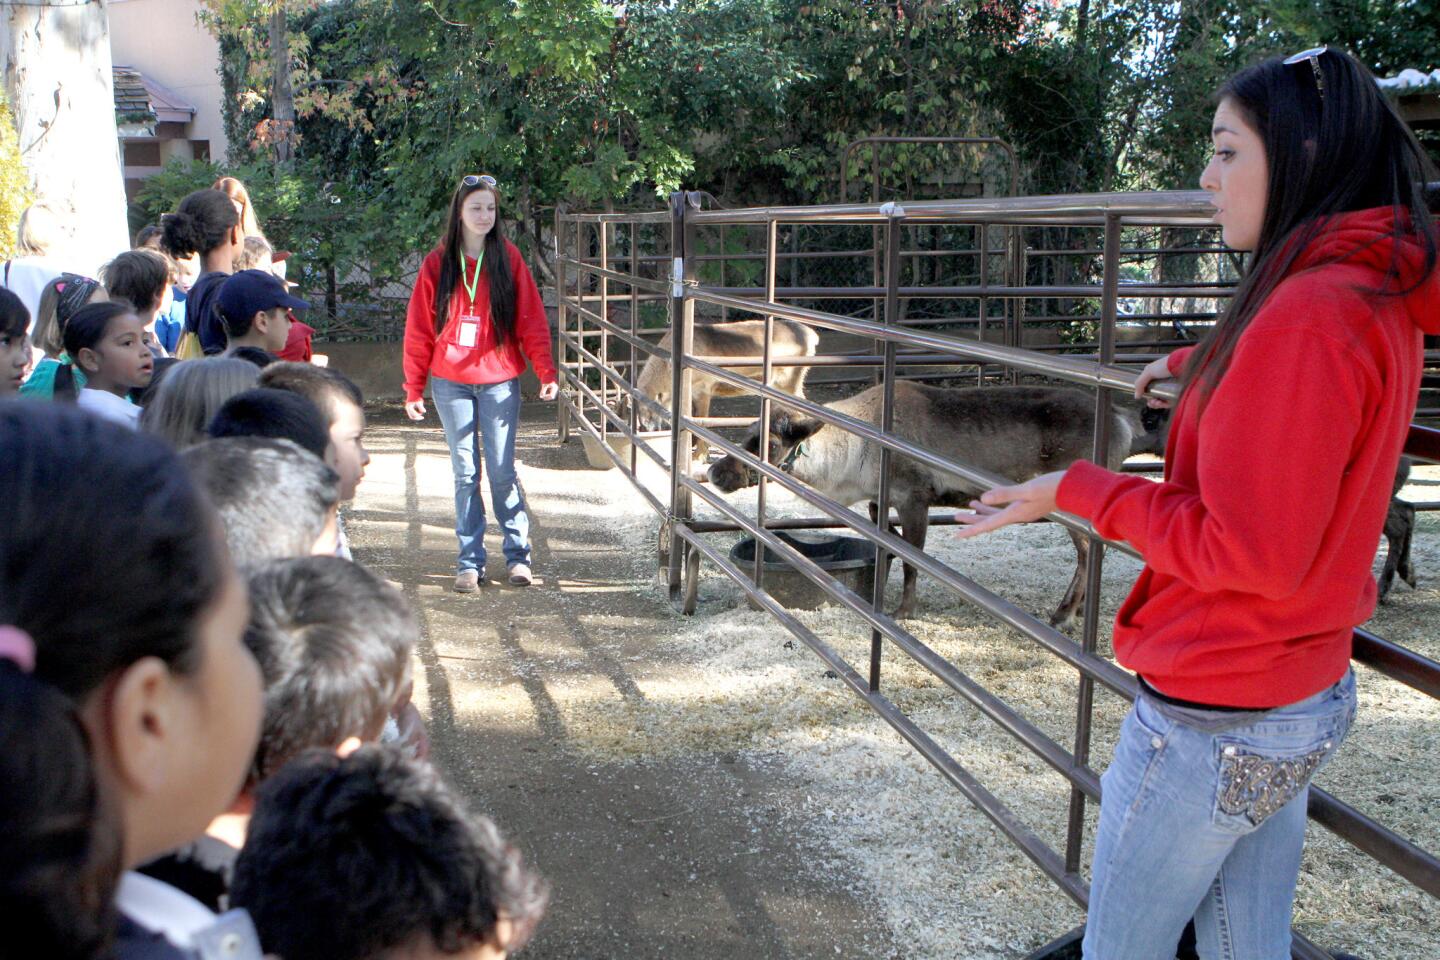 Reindeer Romp reindeer keepers Michele Watkins, left, and Chayanna Smith, right, talk to children about the reindeer at the Los Angeles Zoo, in L.A., on Tuesday Nov. 29, 2016. Along with the reindeer area, there is also an area where children can take their photo with Santa.